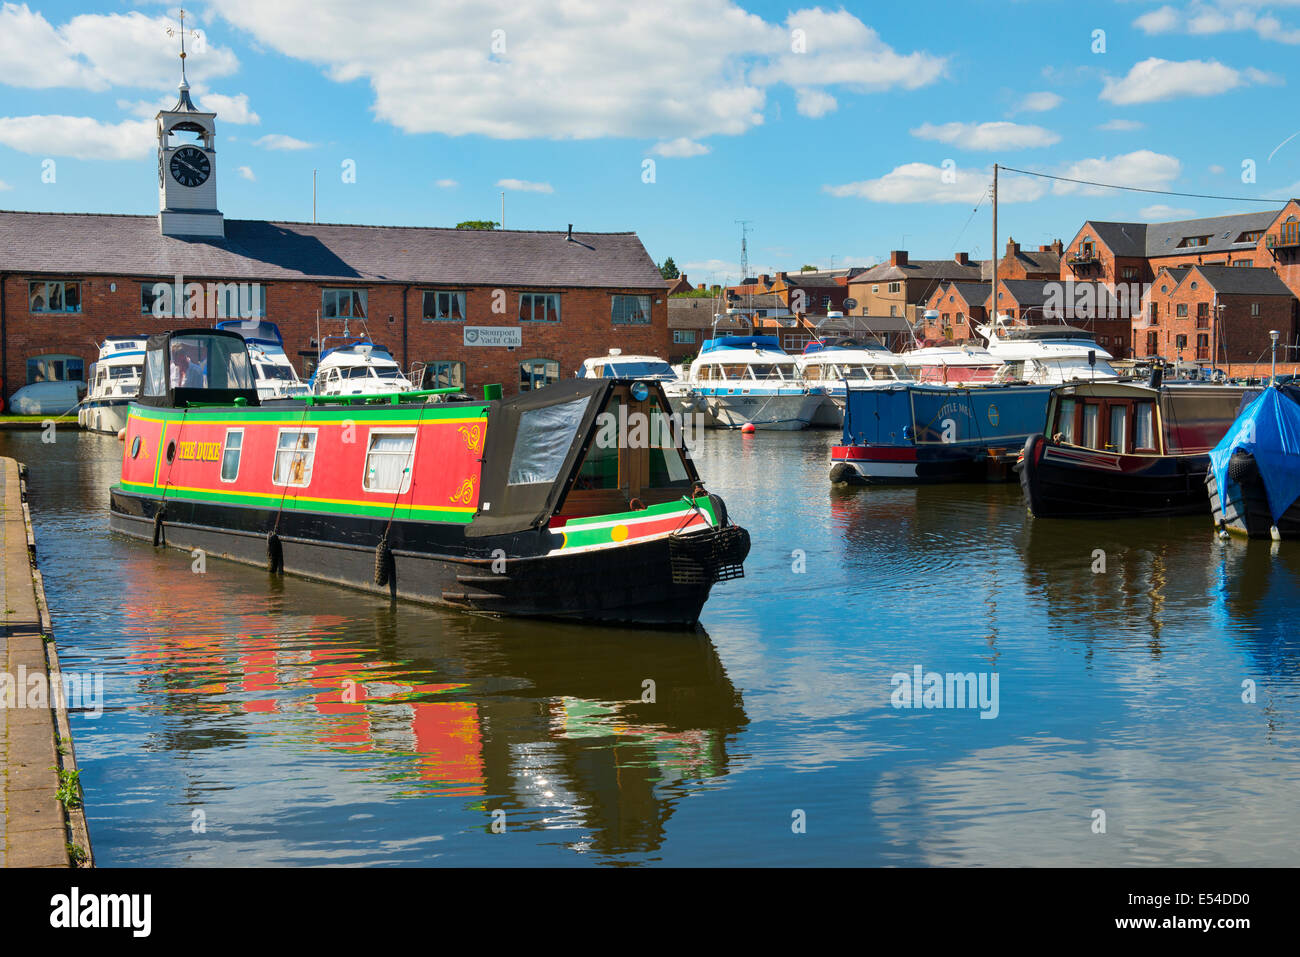 A boat on the Stourport On Severn canal basin, Worcestershire, England, UK. Stock Photo